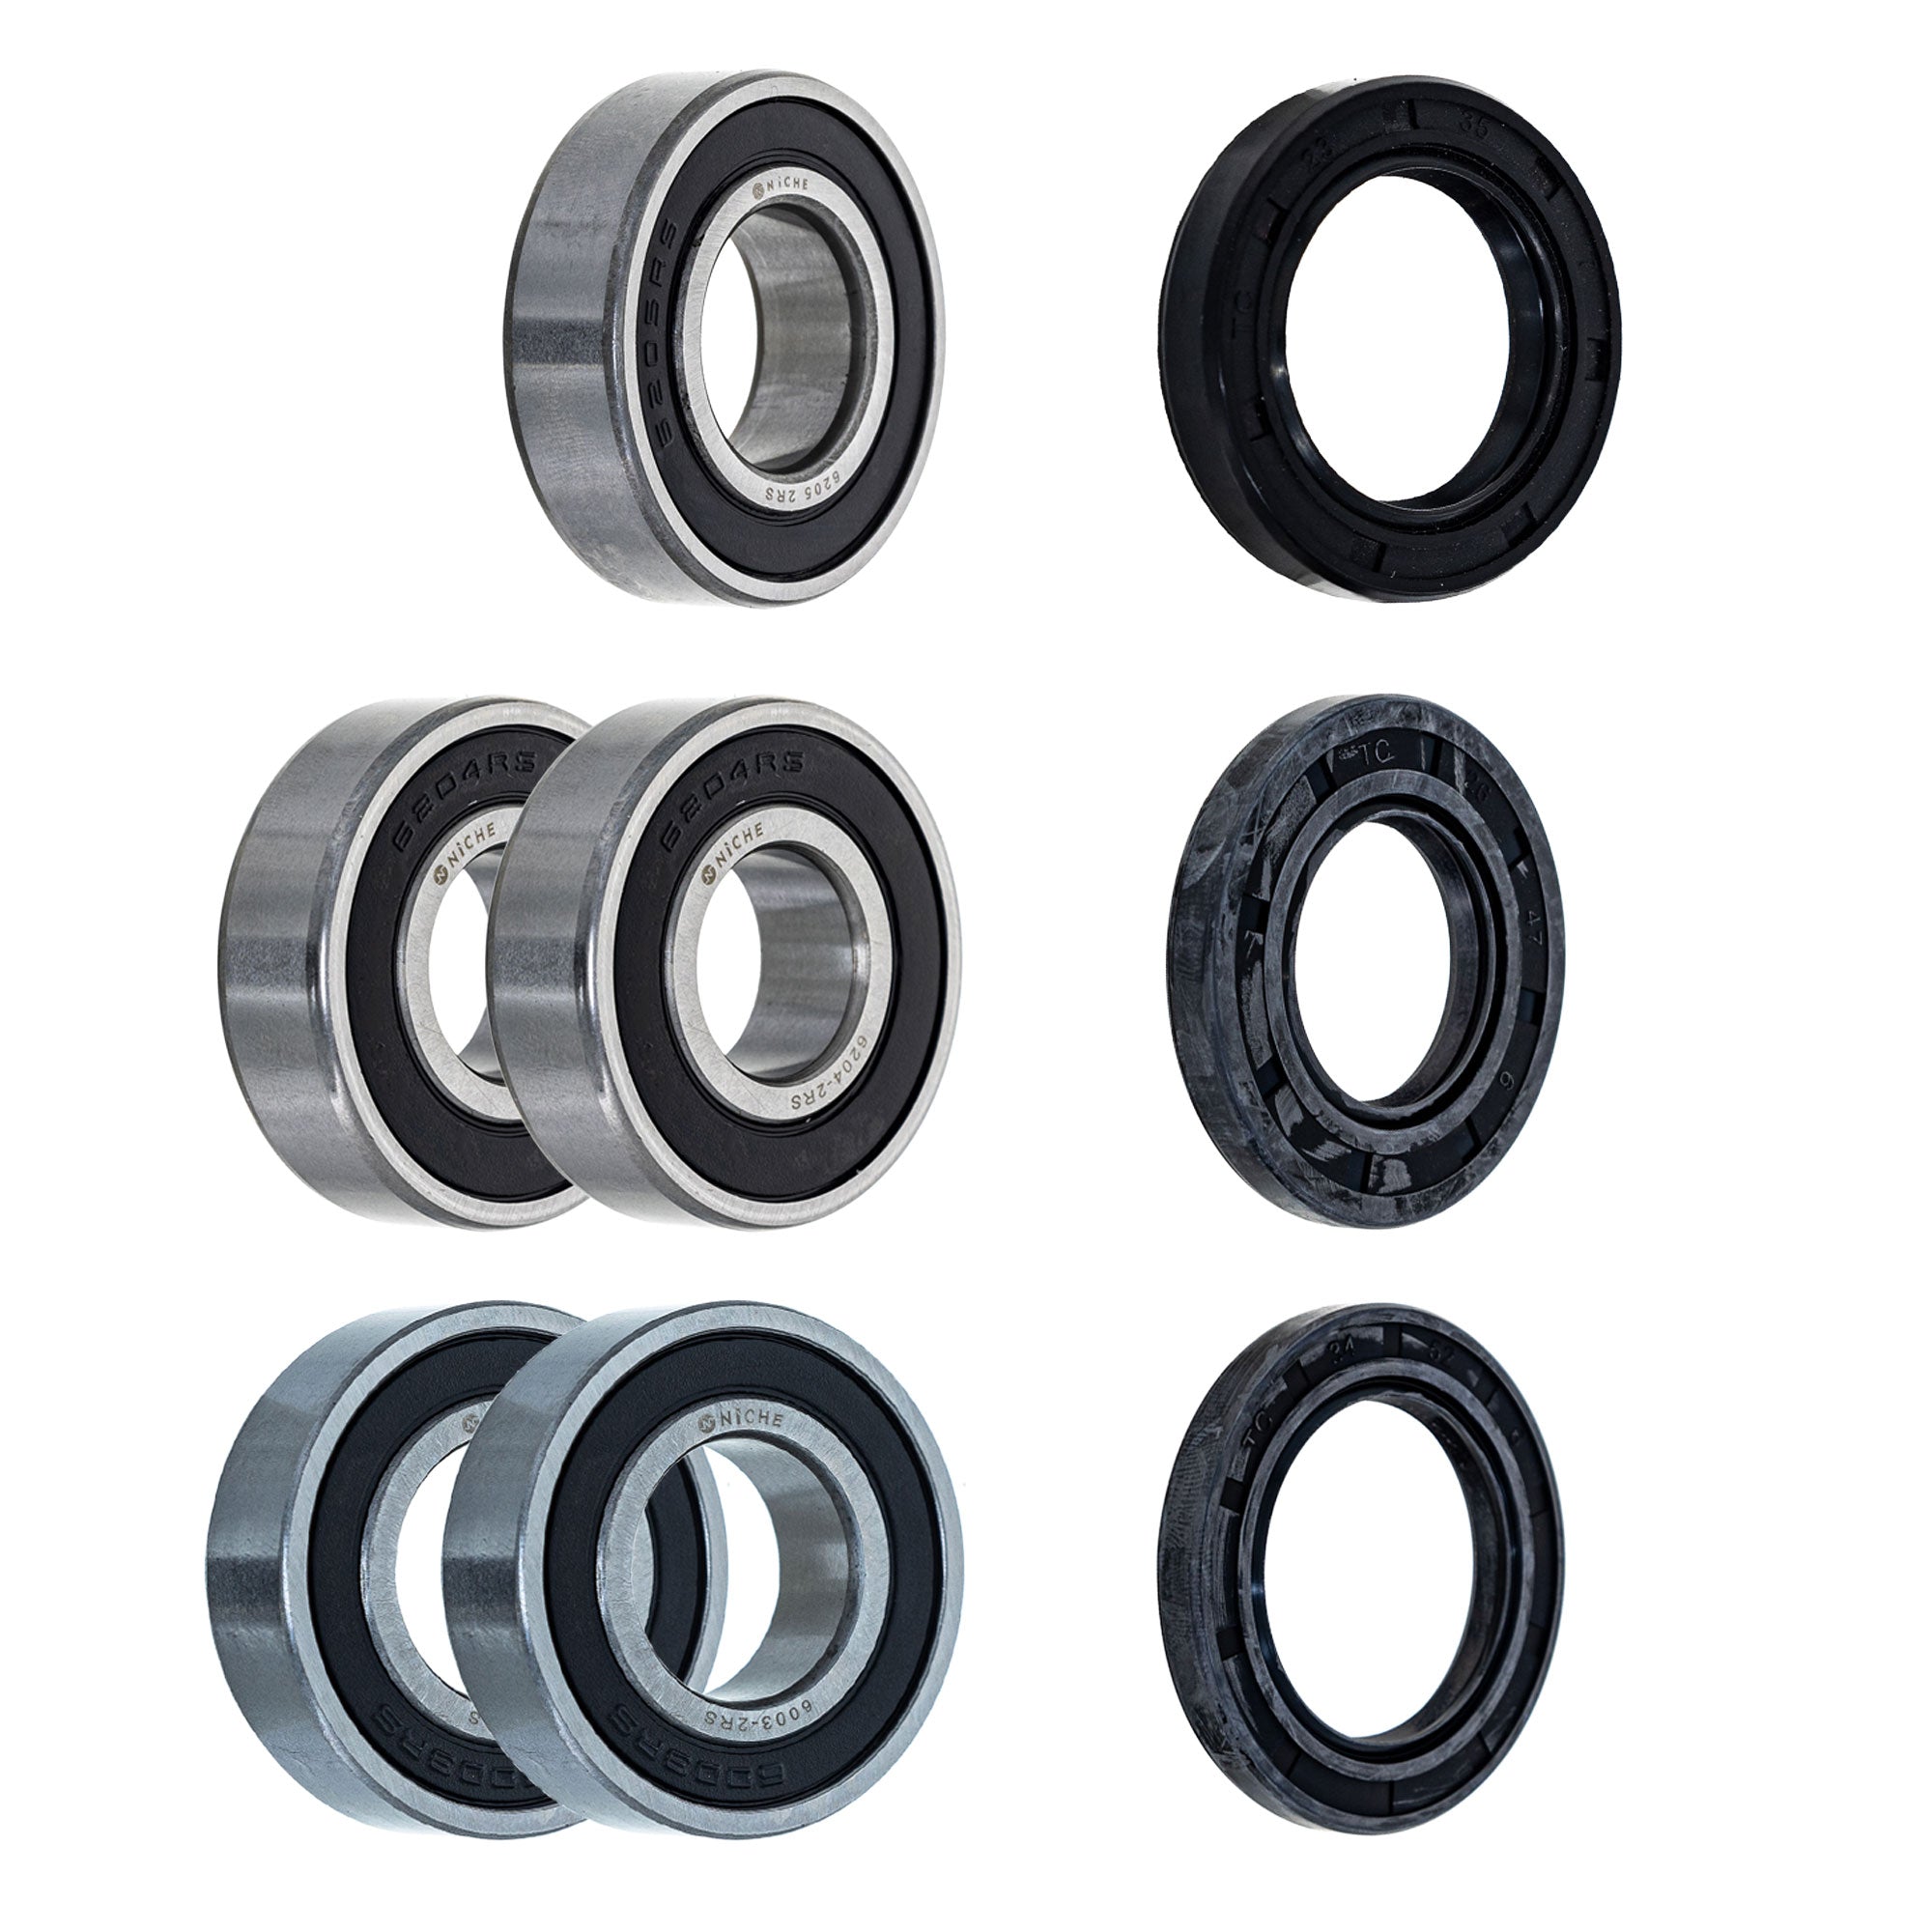 Wheel Bearing Seal Kit for zOTHER Ref No DR650SE NICHE MK1008694